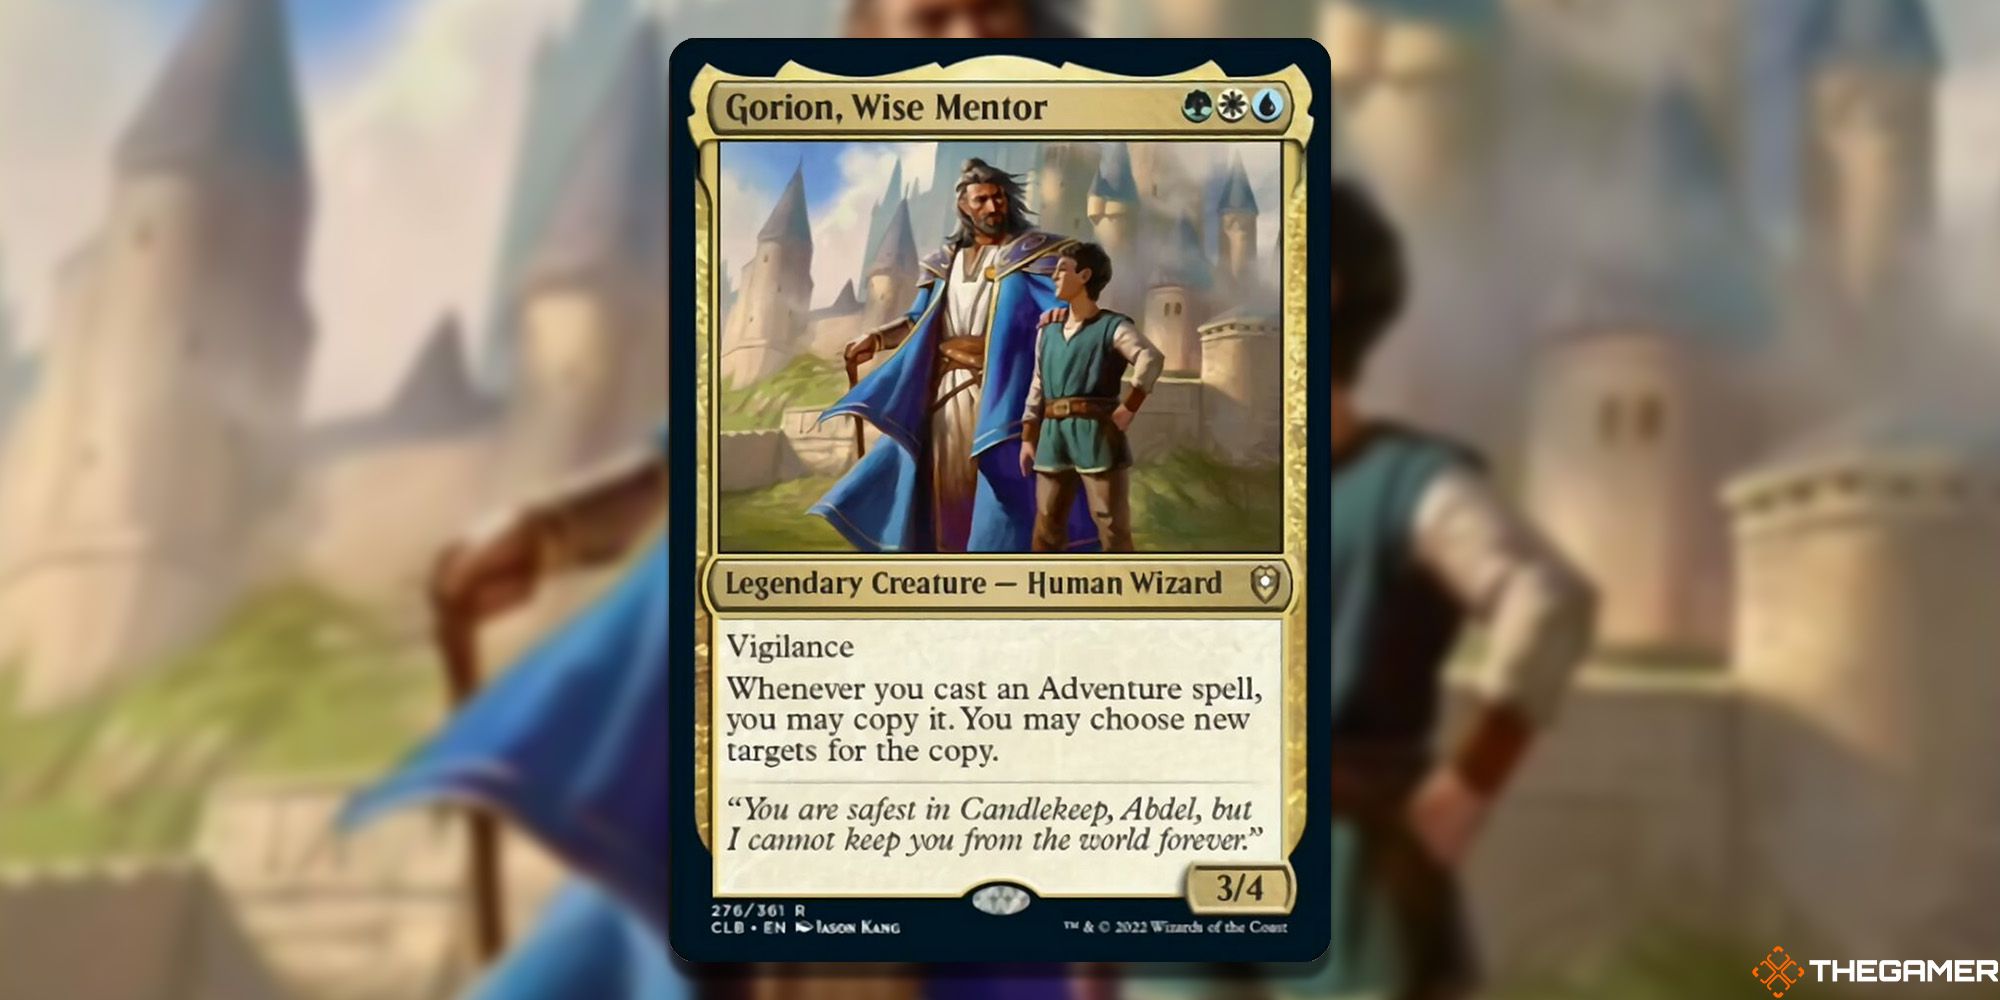 Image of the Gorion, Wise Mentor card in Magic: The Gathering, with art by Jason Kang